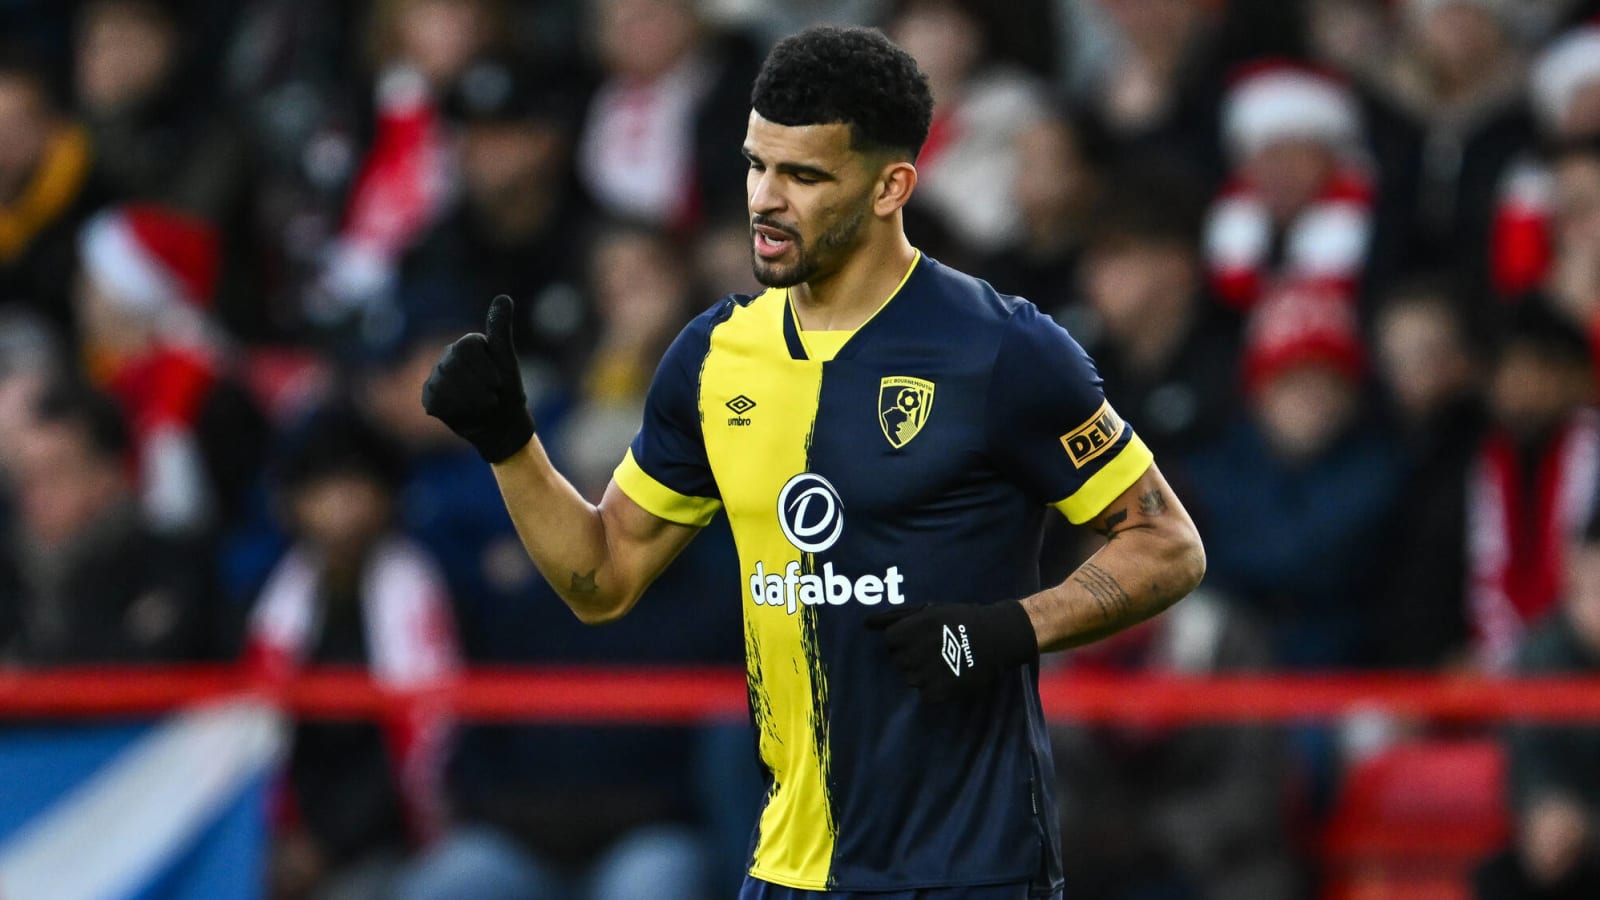 Tottenham are more likely to sign Chelsea star than Dominic Solanke on Deadline Day